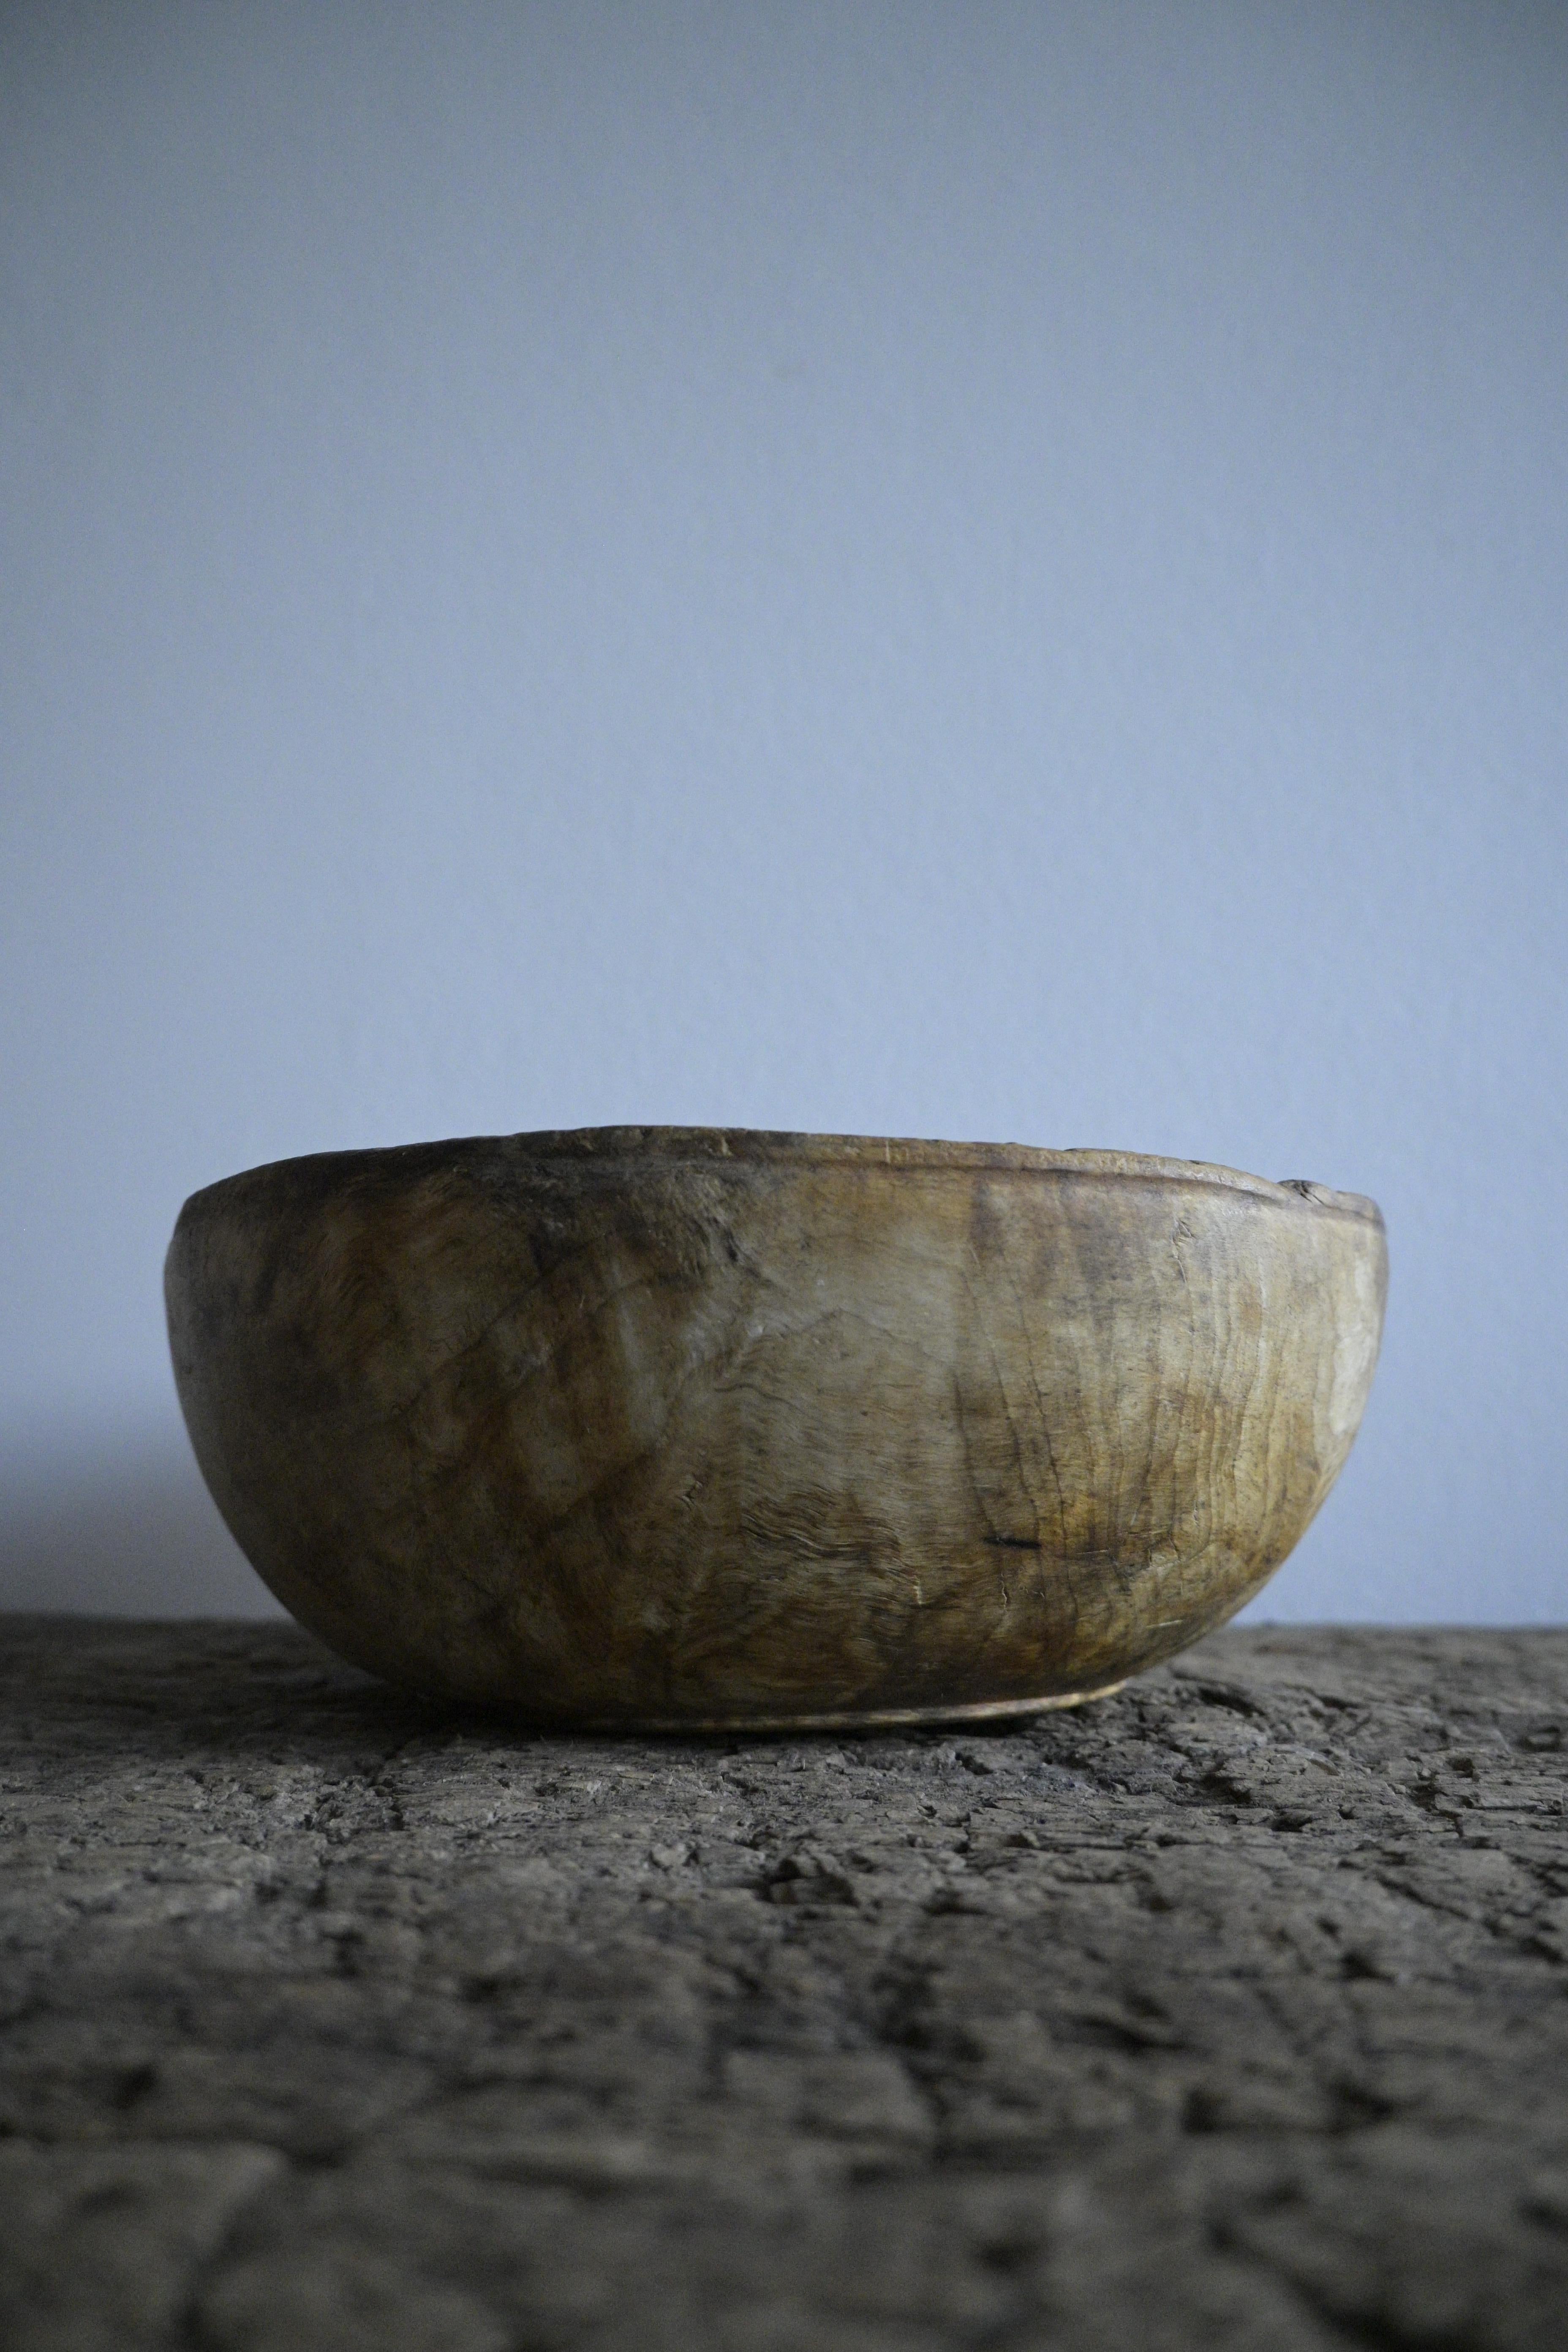 Swedish Birch Burl Bowl early 1900 century

Smooth beautiful surfuce with a small stand.

Made out of birch burl wood.

Heigth: 9 cm/3.5 inch
Diameter: 25 cm/9.8 inch